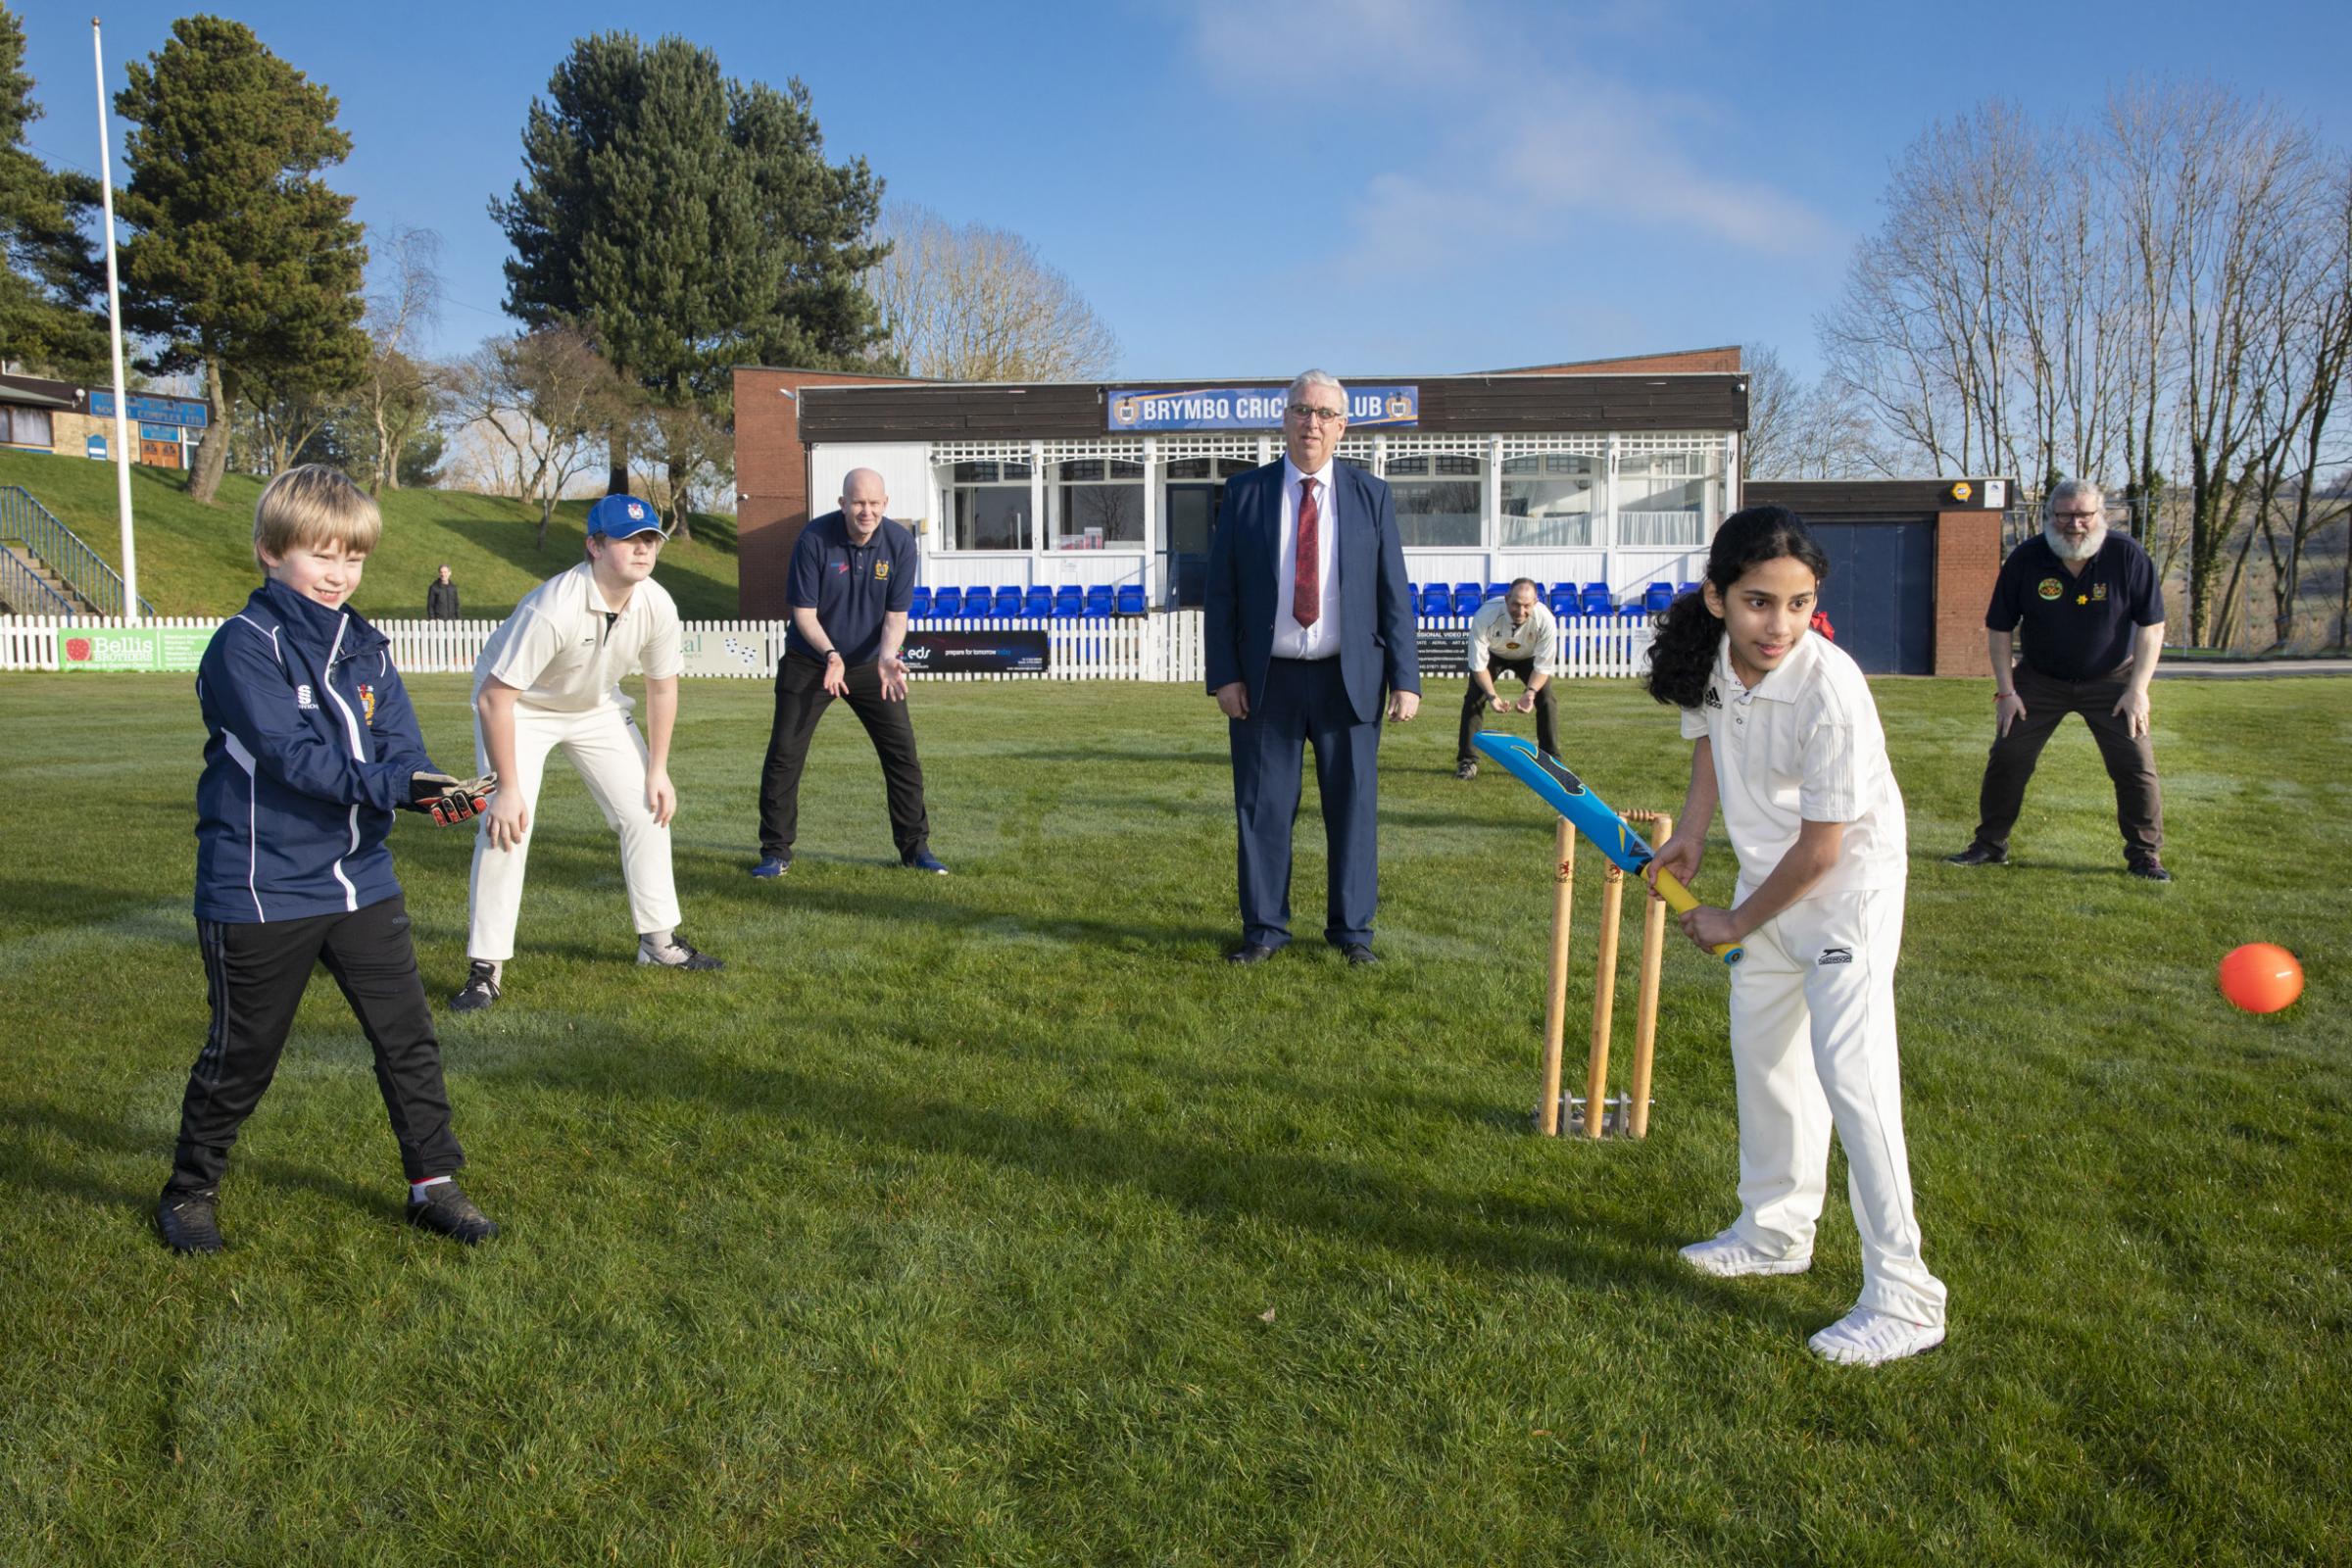 PCC Your Community your choice awards; Pictured at Brymbo cricket club; young Brymbo cricketer Tanvee Pallath plays straight as the field closes in, from left, front Tomos Rhys and Morgan Jones, rear, Brymbo vice-chairman Dafydd Rhys, North Wales Police